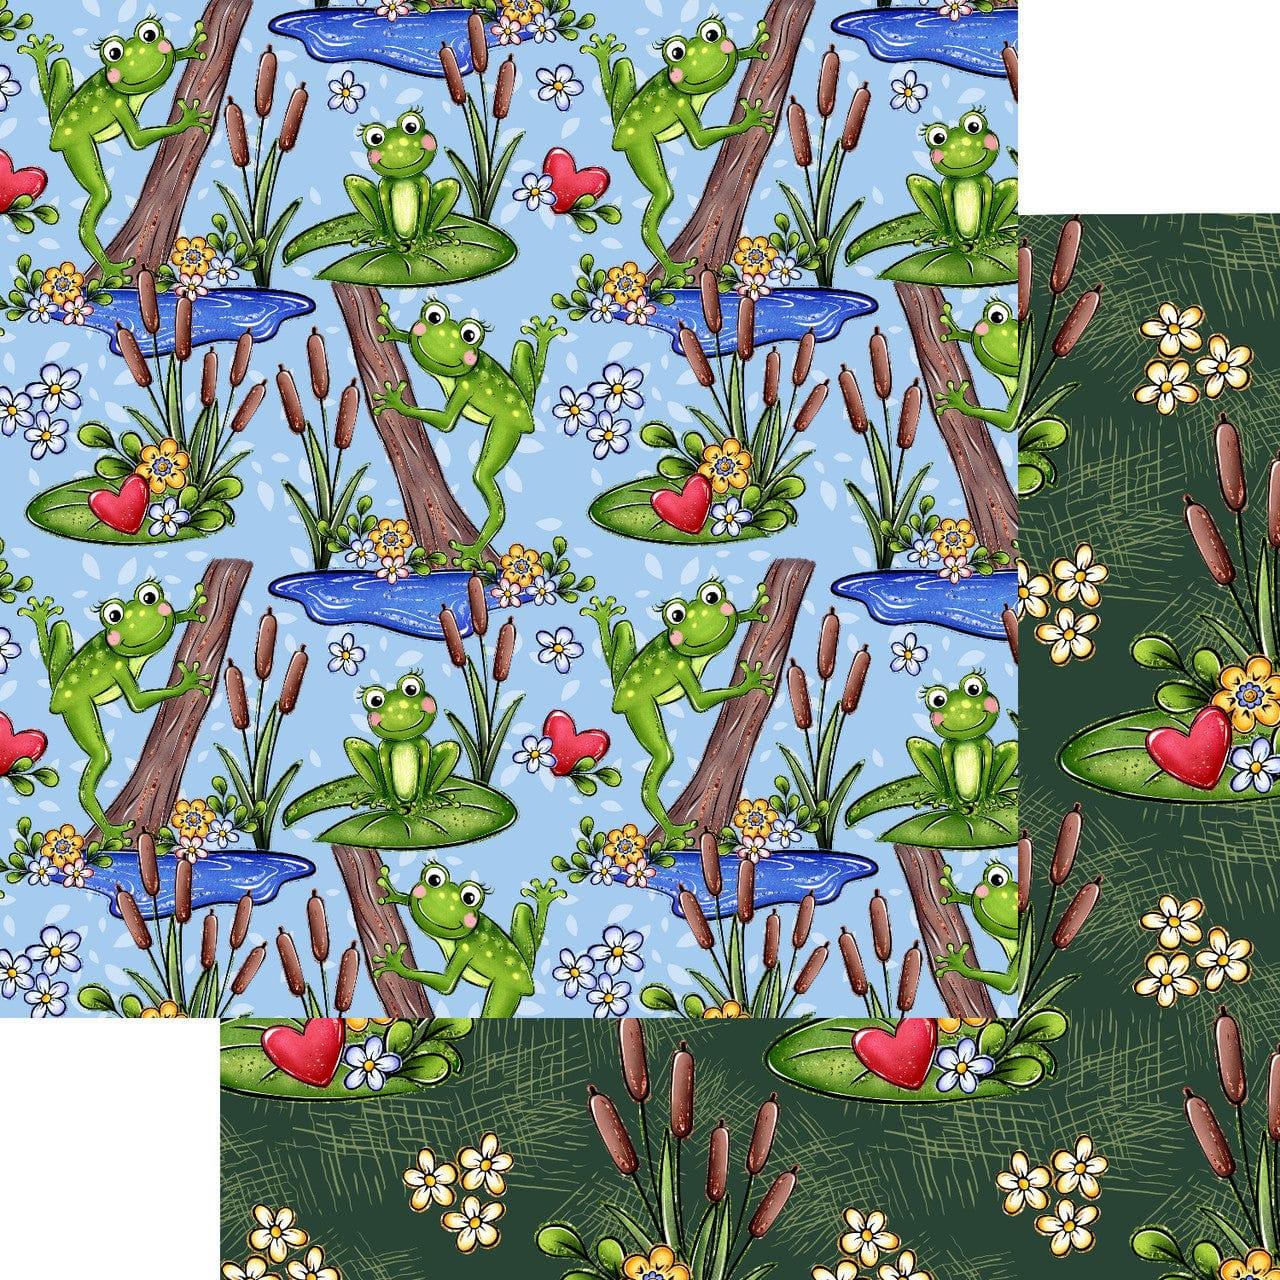  Frogs In The Morass 12 x 12 Scrapbook Paper & Embellishment Kit by SSC Designs - Scrapbook Supply Companies